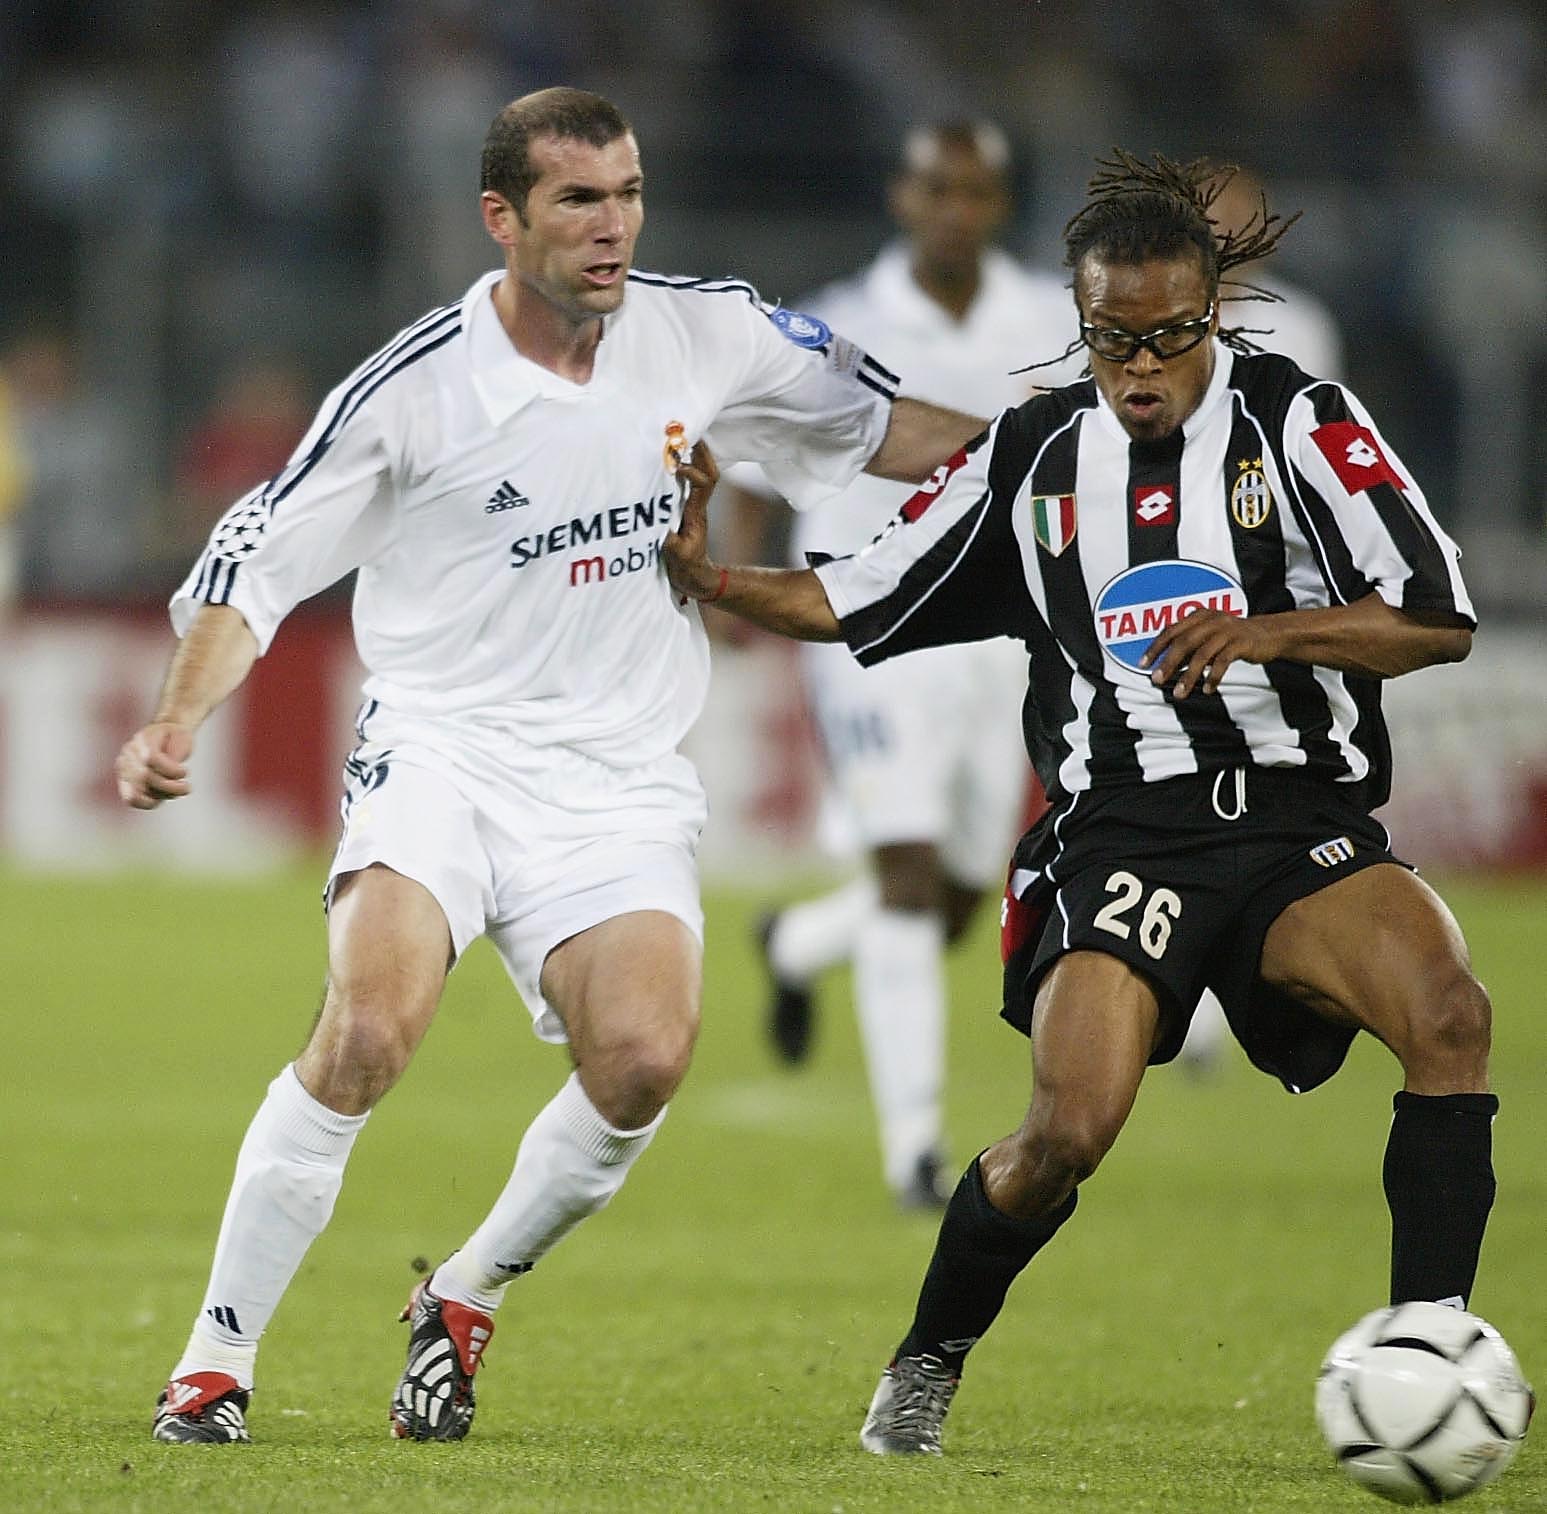 TURIN, ITALY - MAY 14:  Edgar Davids of Juventus holds off a challenge from Zinedine Zidane of Real Madrid during the UEFA Champions League semi final second leg match between Juventus and Real Madrid on May 14, 2003 at the Stadio Delle Alpi in Turin, Ita